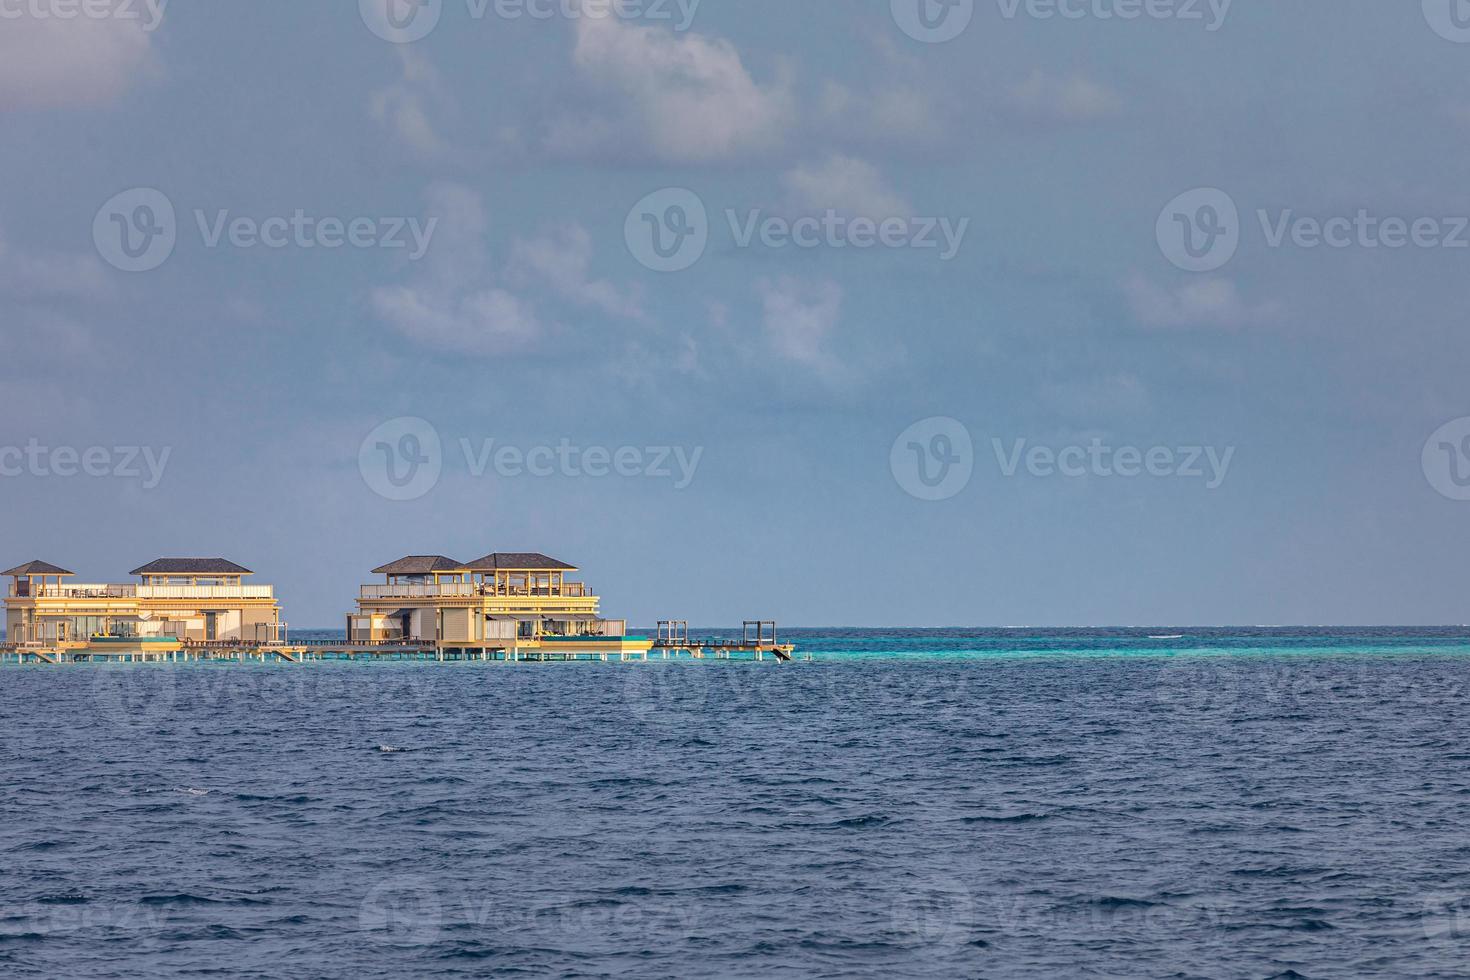 Water villas resort. Maldives Island, Indian Ocean. View from boat, exotic luxury over water bungalows. Summer travel and tourism concept, architecture elements on water photo